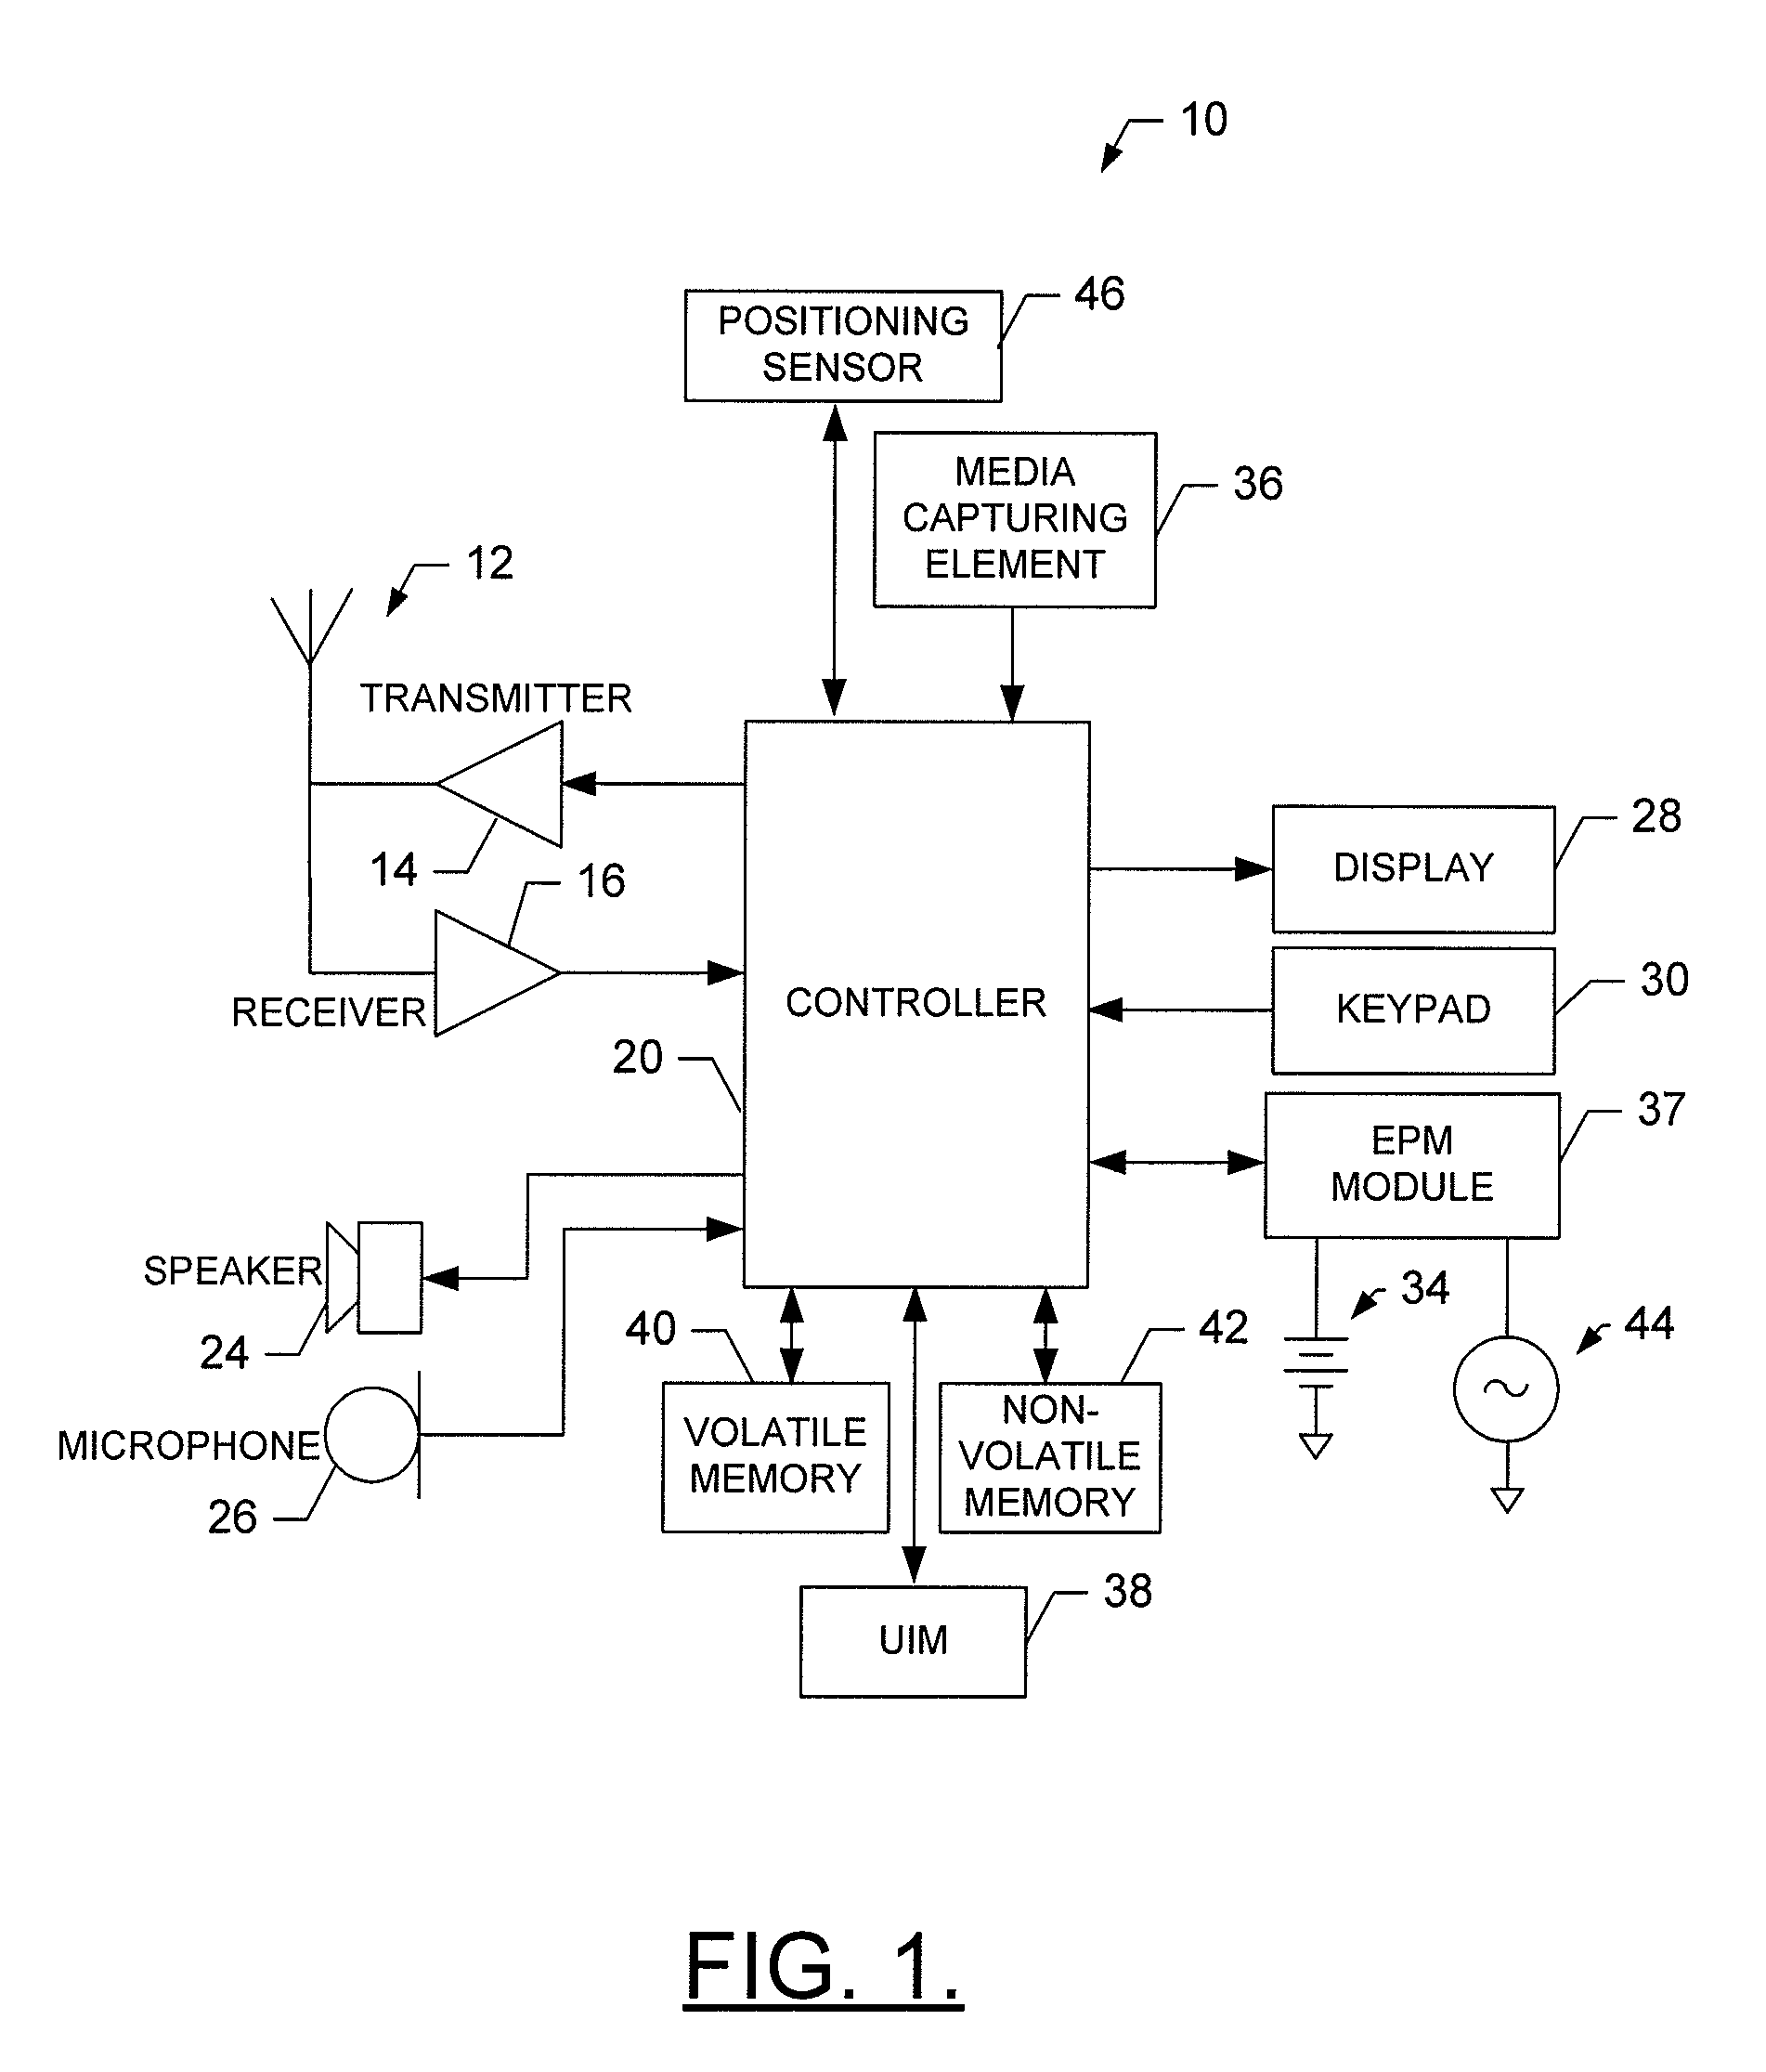 Method, Apparatus and Computer Program Product for Providing Power Consumption Notification and Management